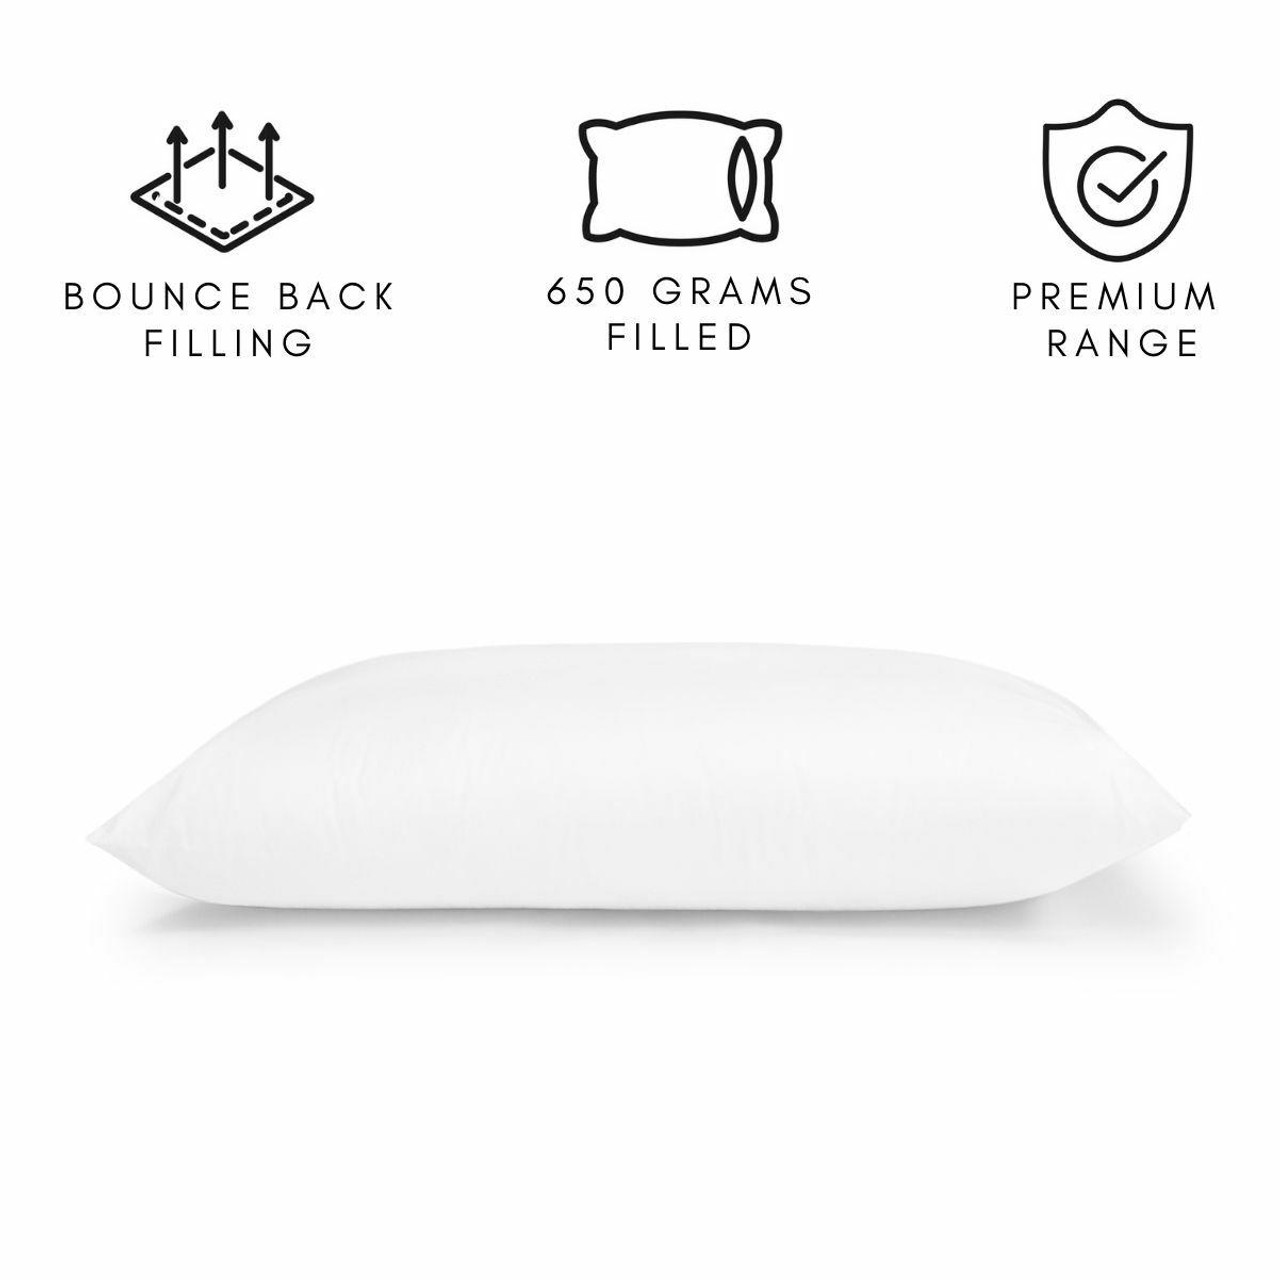 Bounce Back Pillows from the towel shop